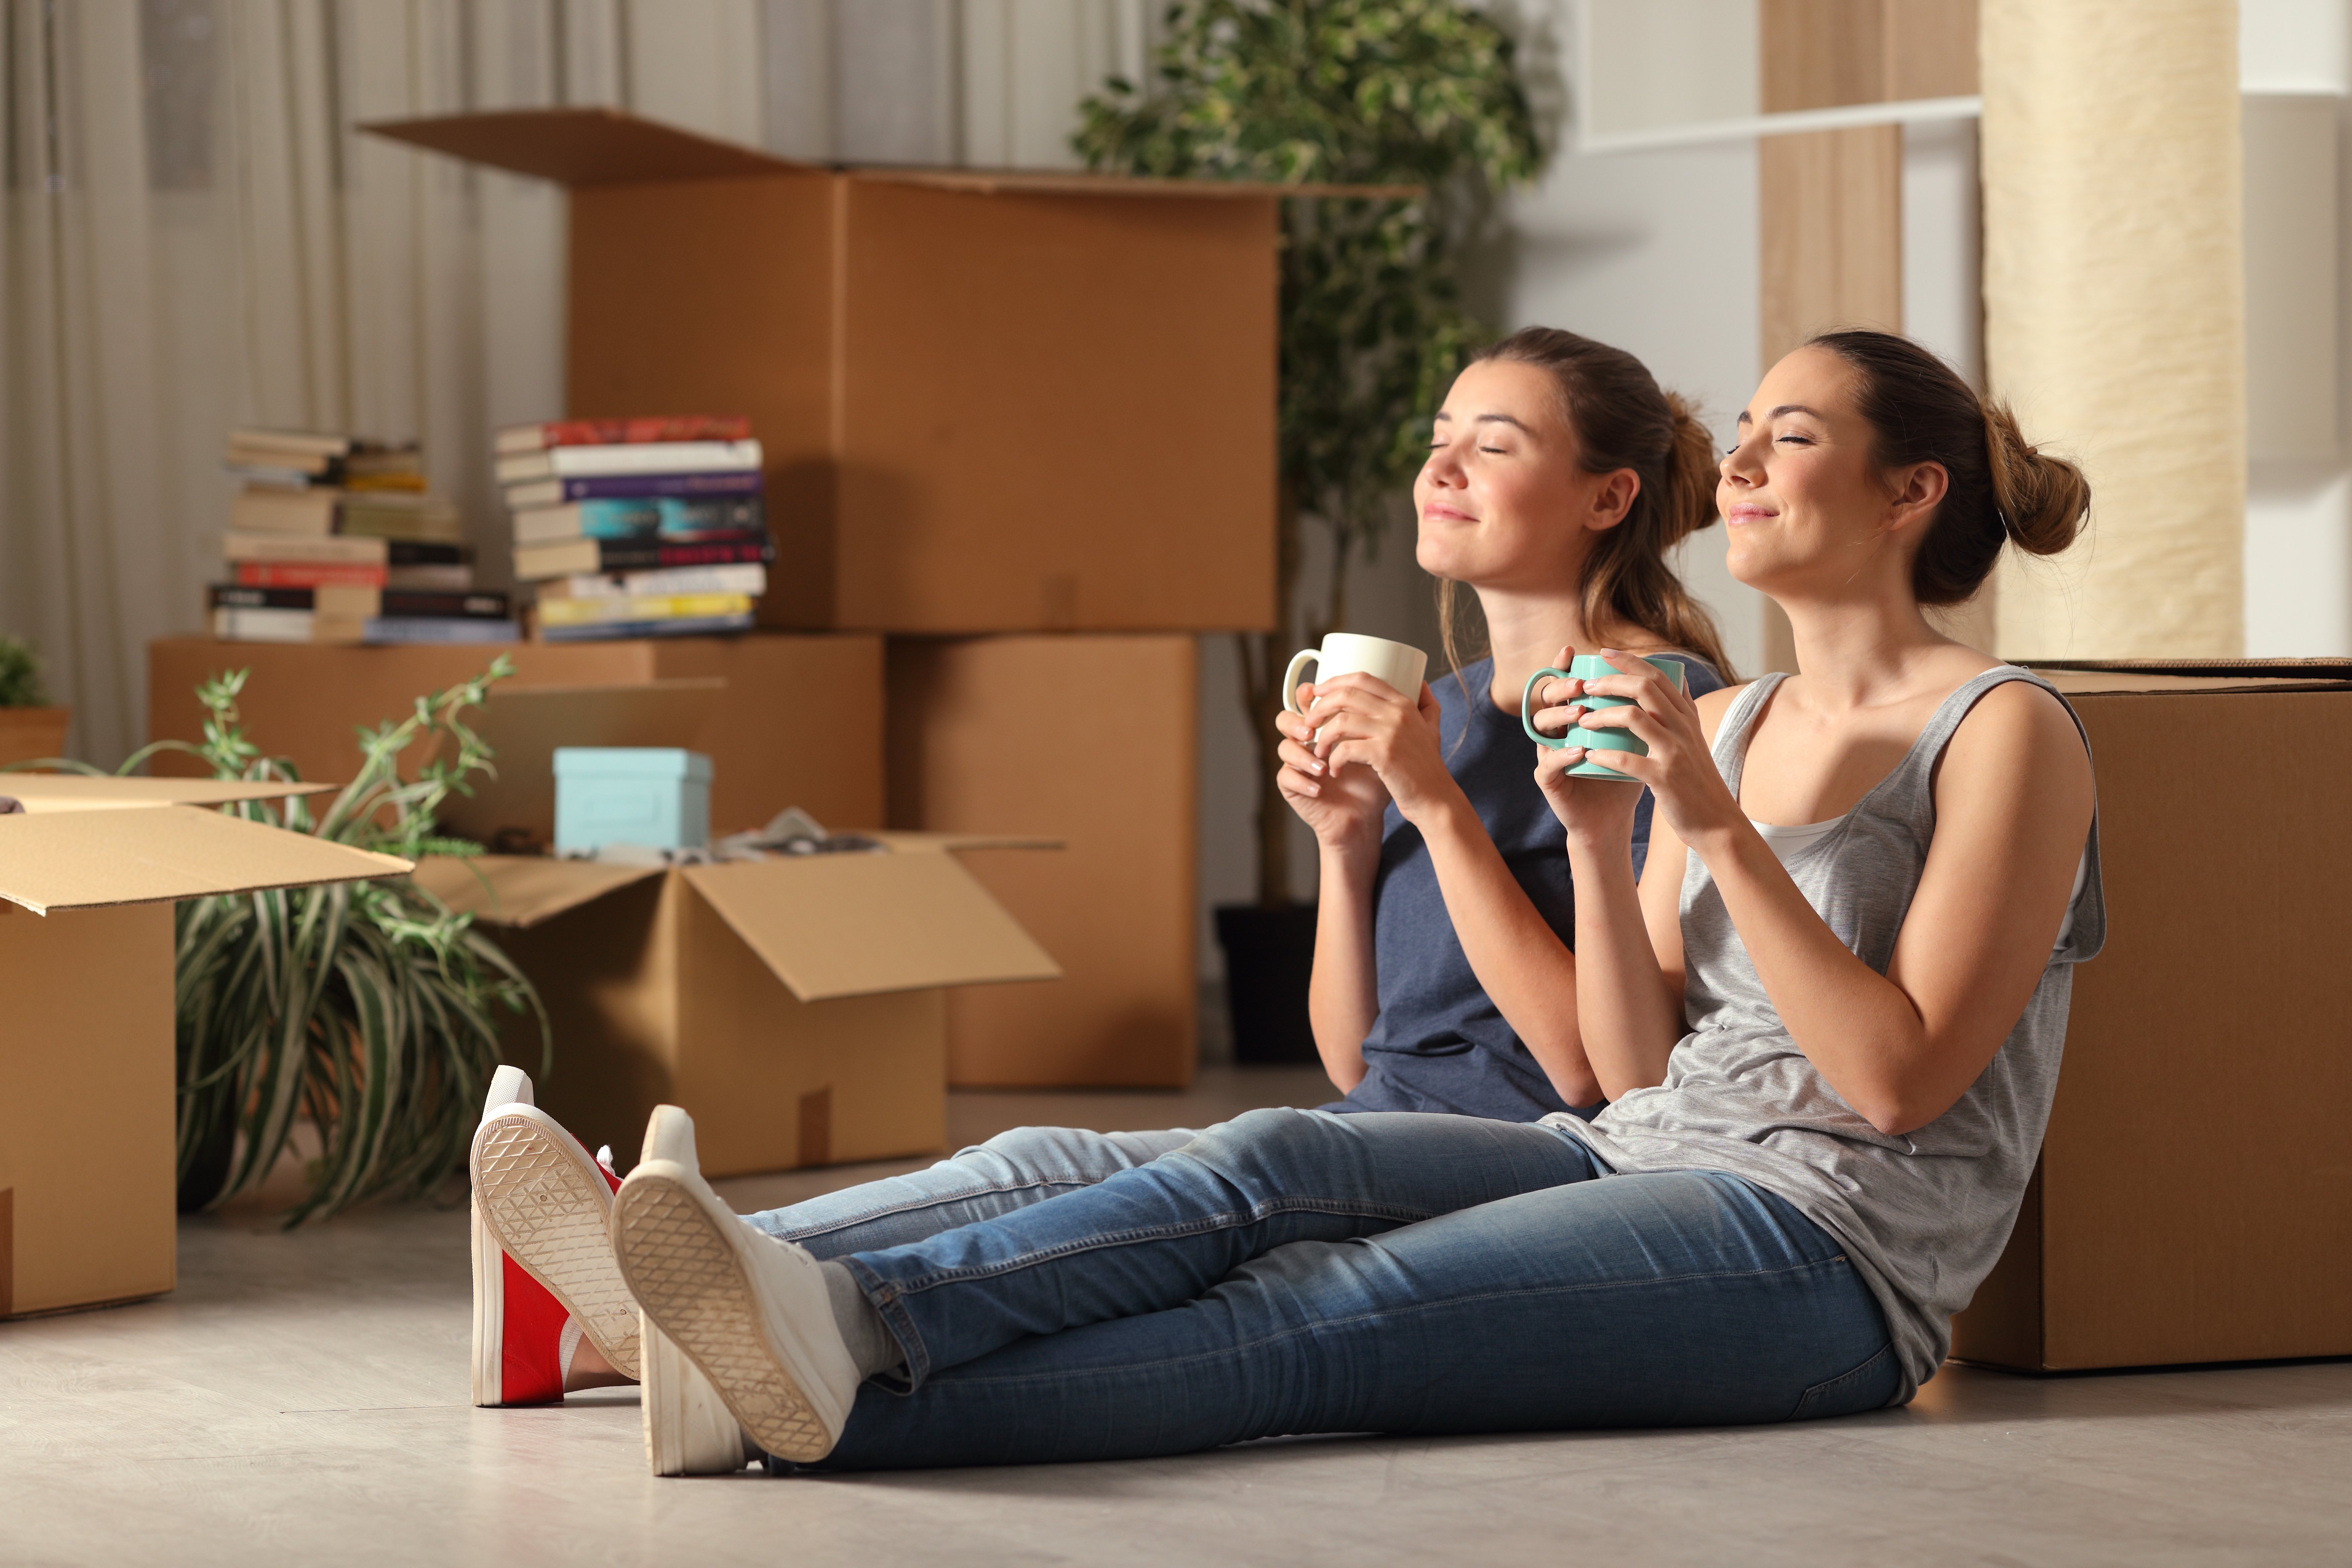 Two young women happily holding mugs while resting from unpacking. | Source: Shutterstock